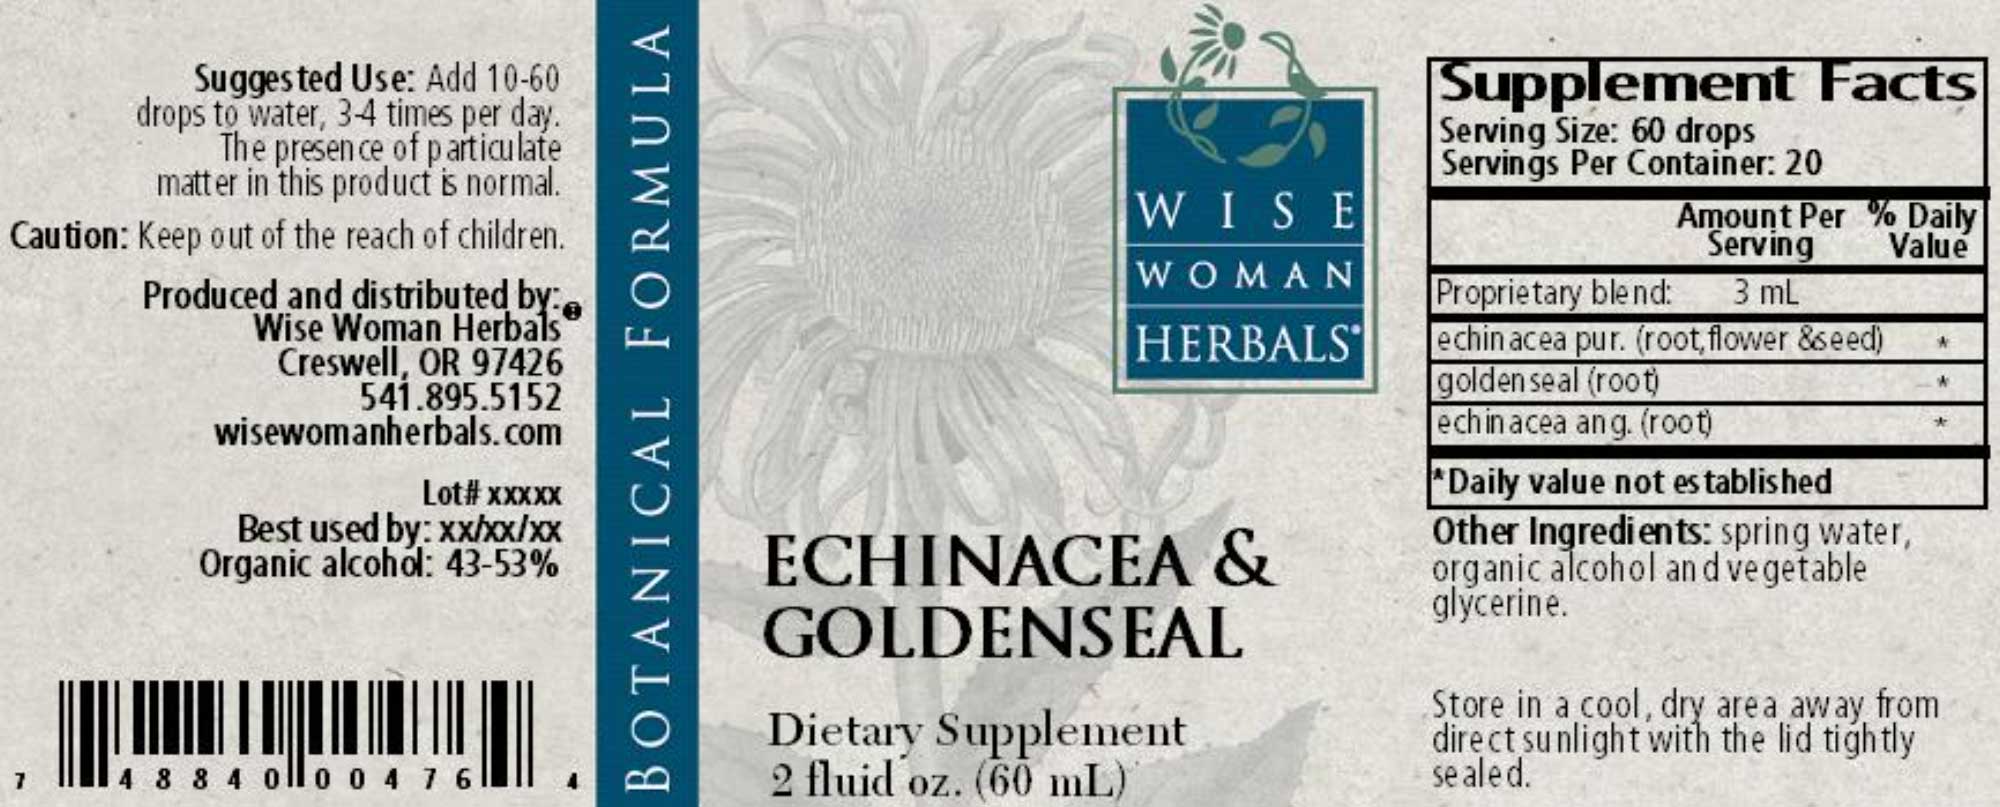 Wise Woman Herbals Echinacea and Goldenseal Label